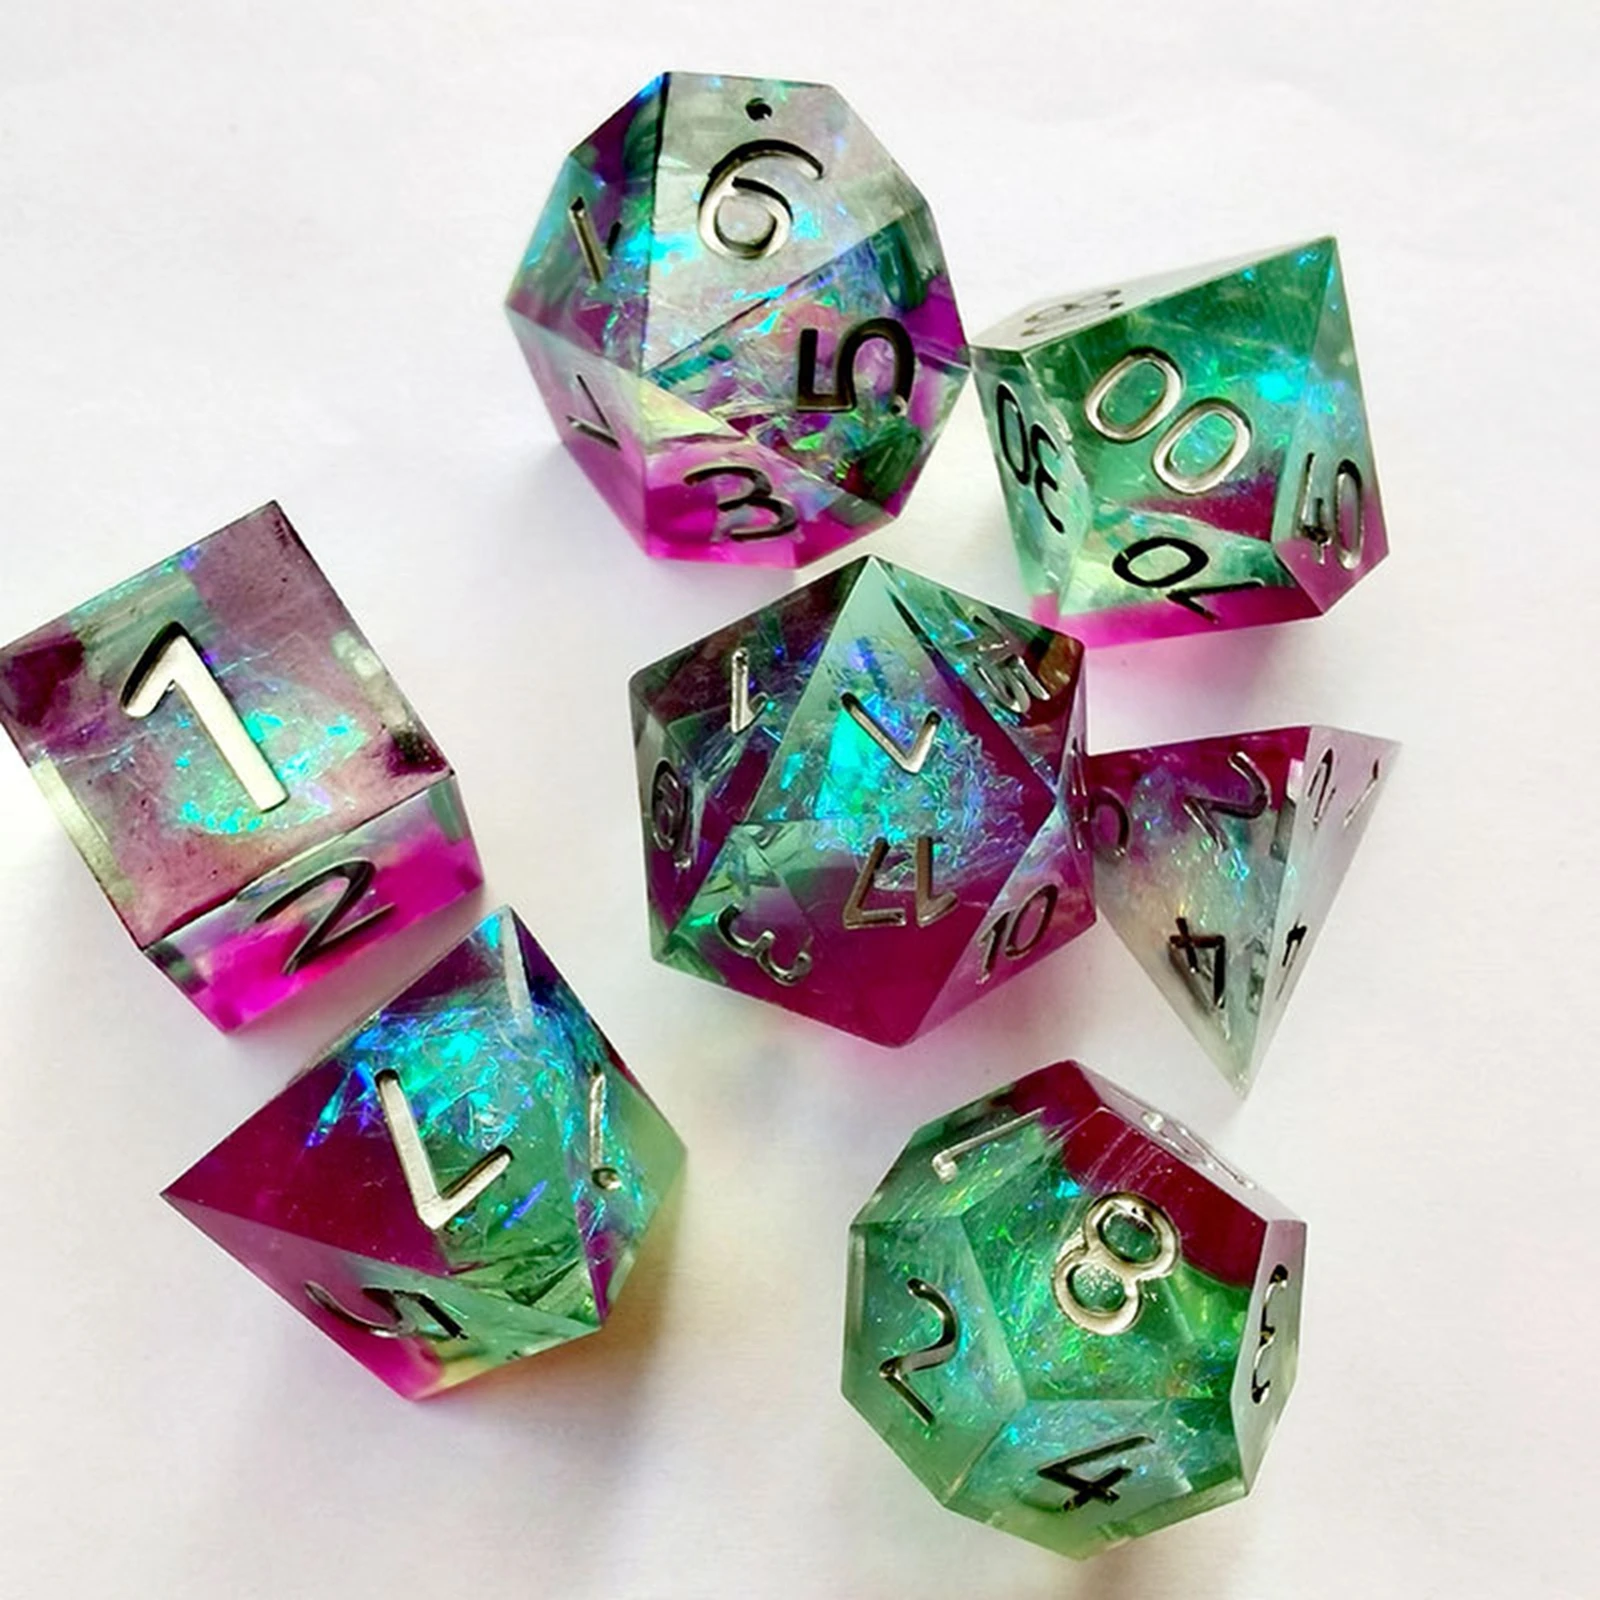 Polyhedral Dice Beautiful Inclusions D4 D6 D8 D10 D% D12 D20 Transparent Set for Pathfinder Table Games Mtg Role Playing